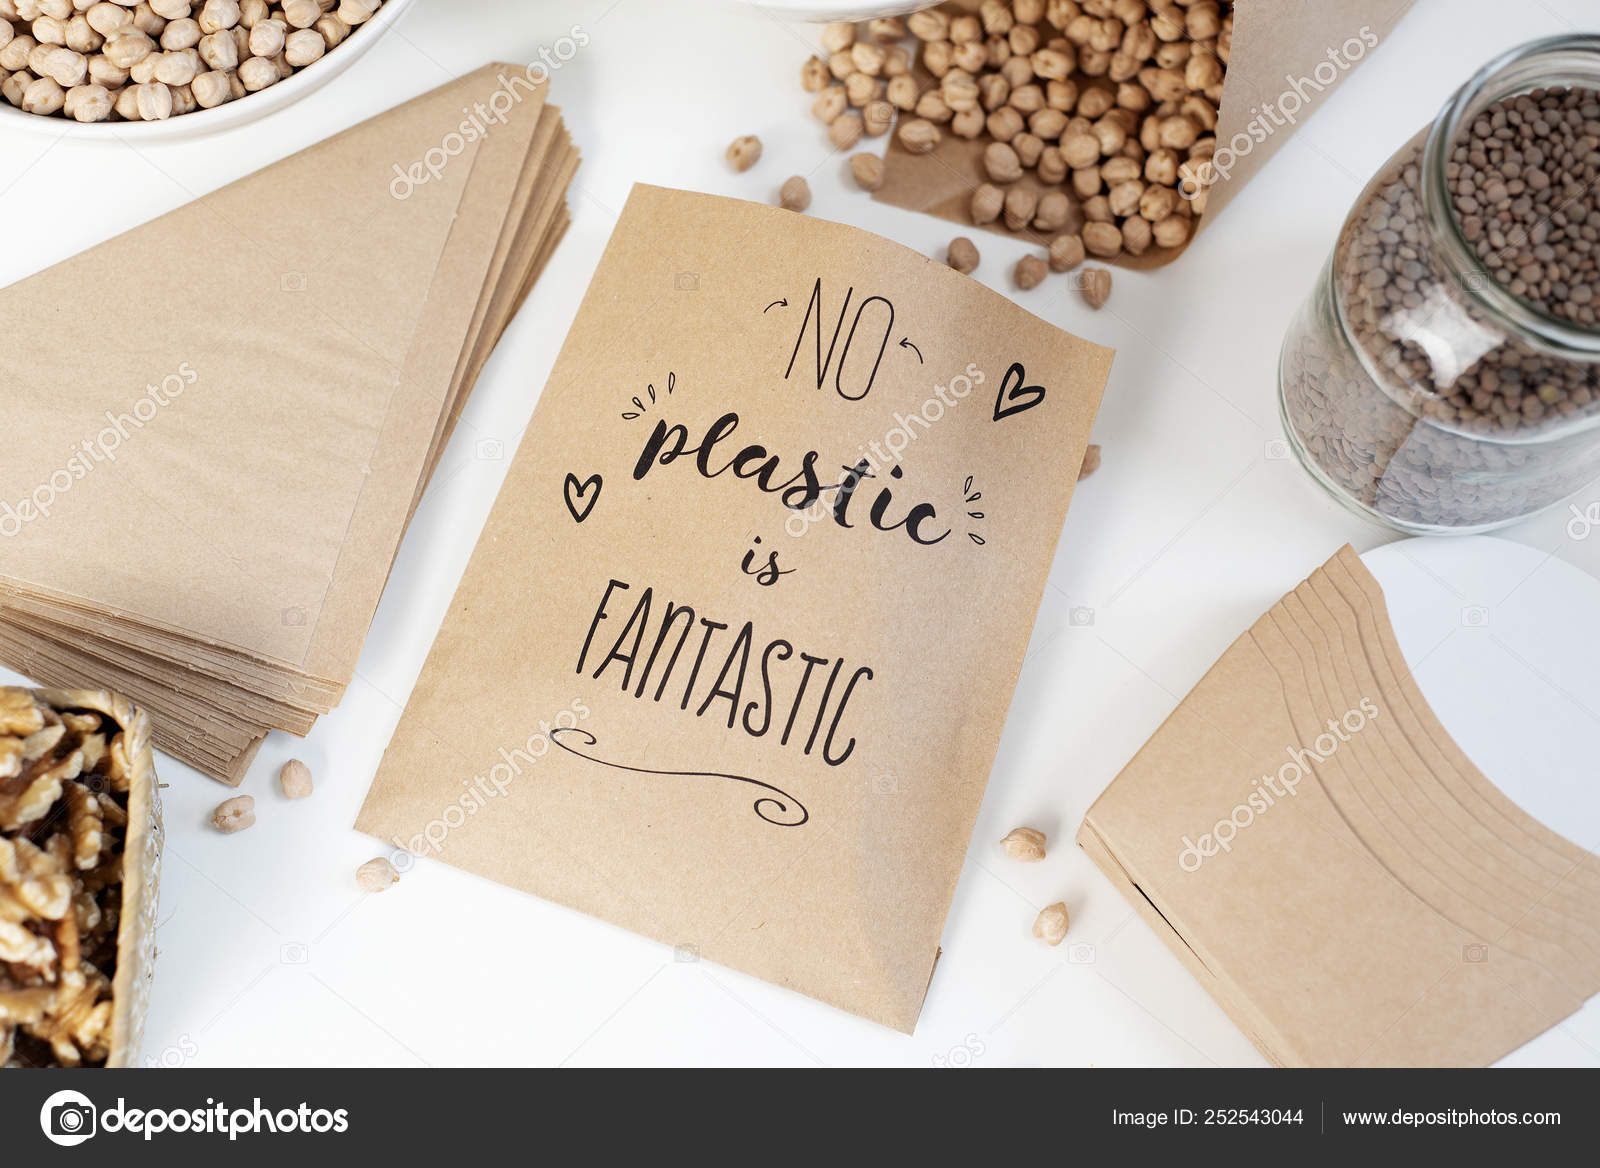 Text No Plastic Is Fantastic In A Paper Bag Stock Photo